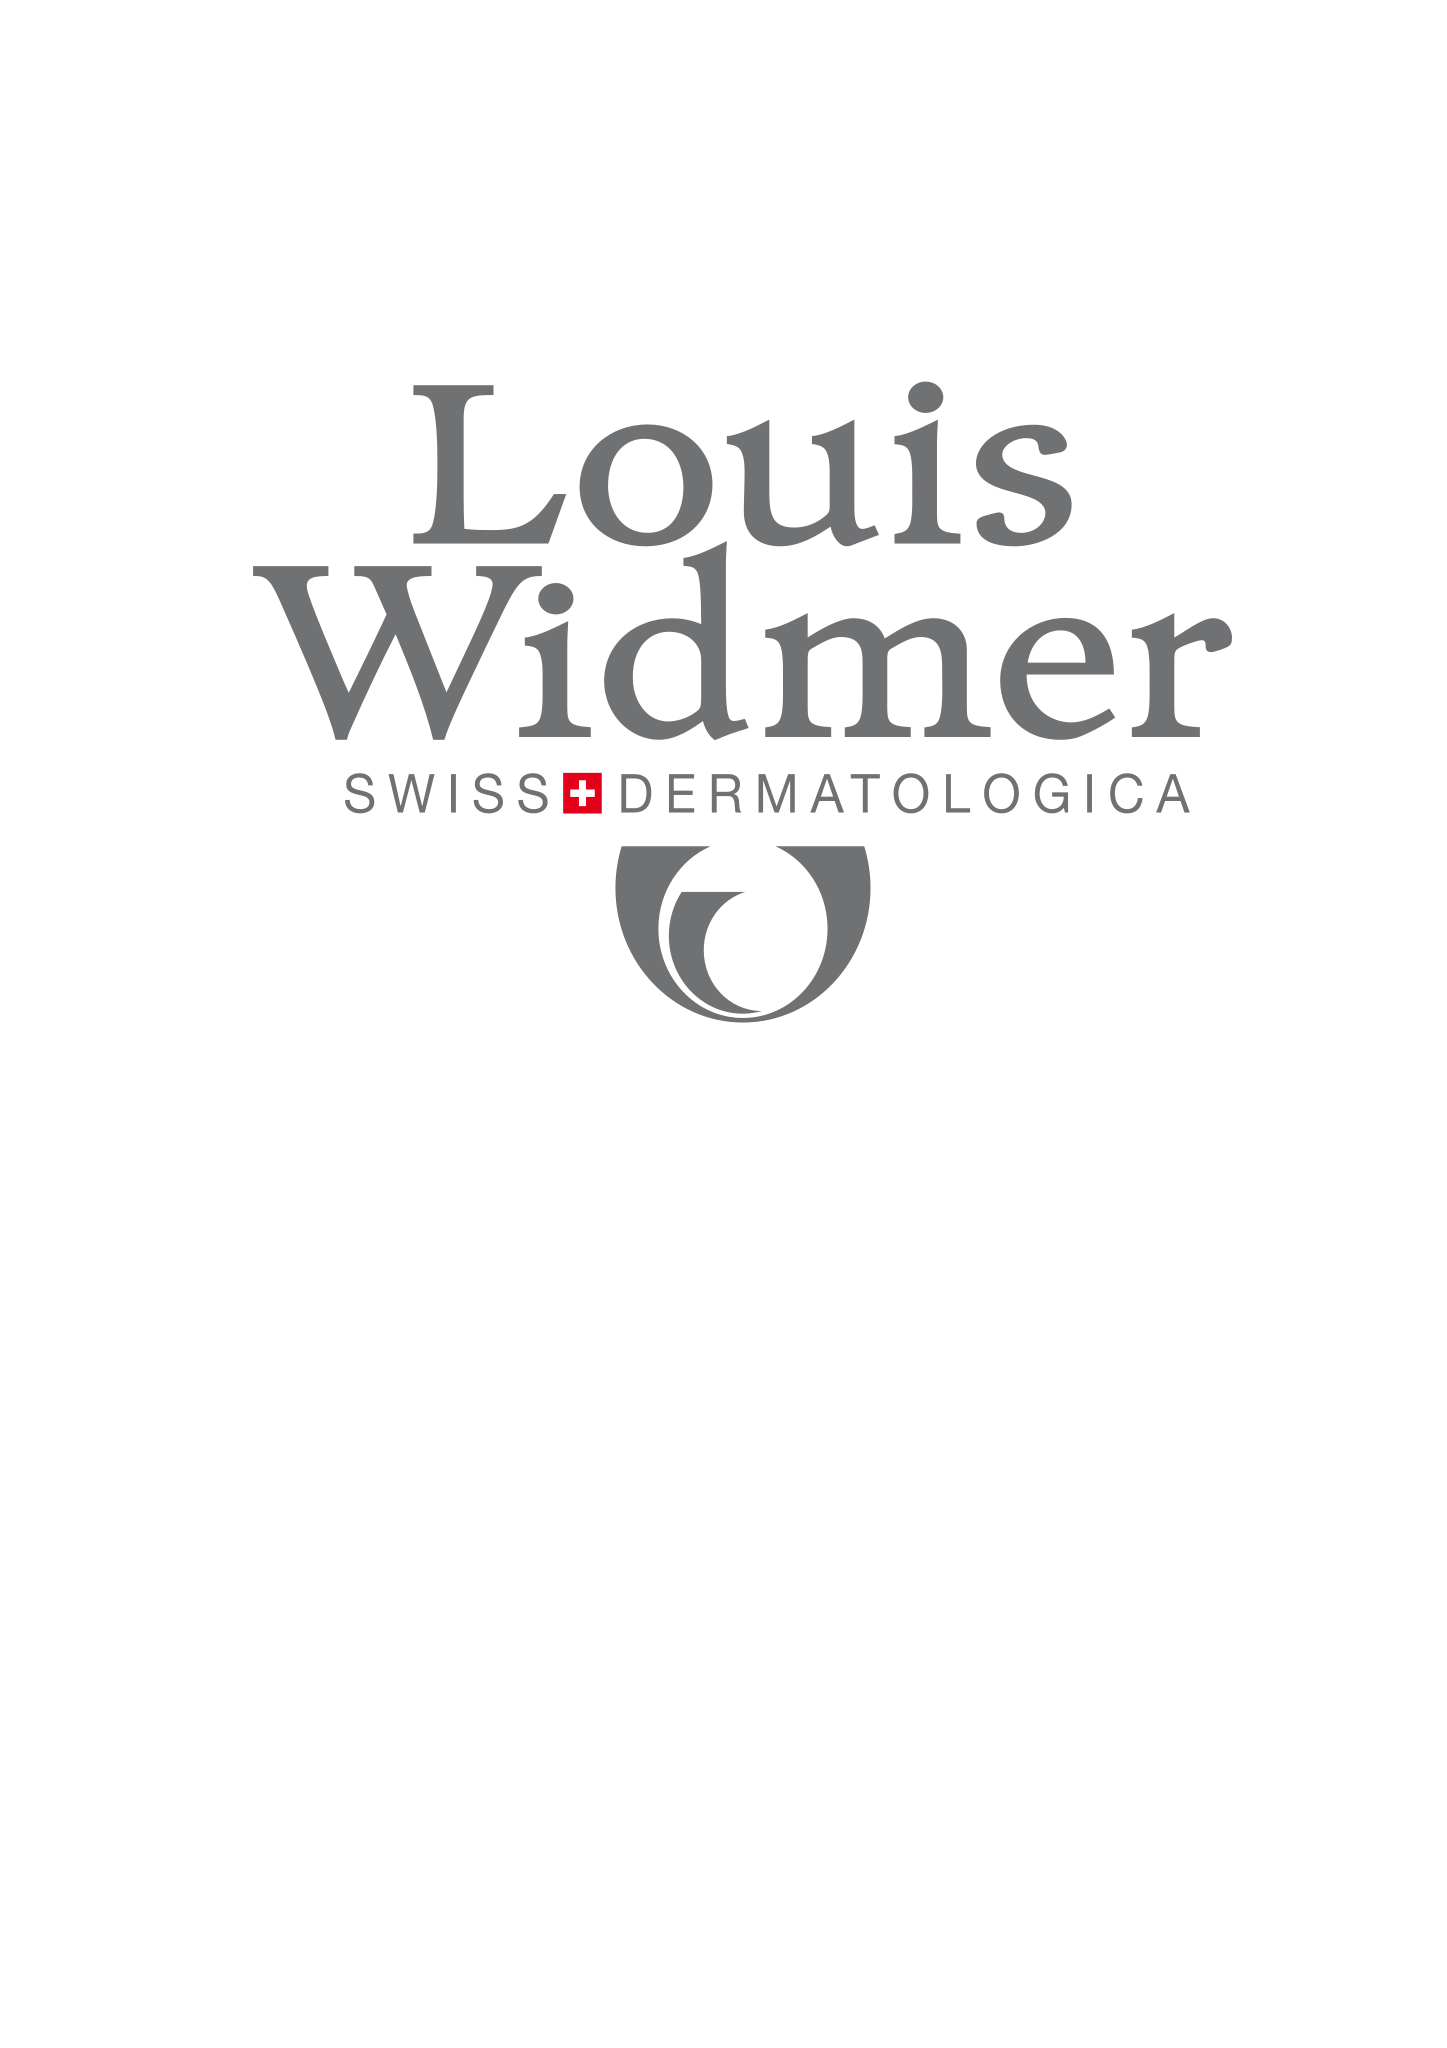 File:Louis Widmer.svg - Wikimedia Commons